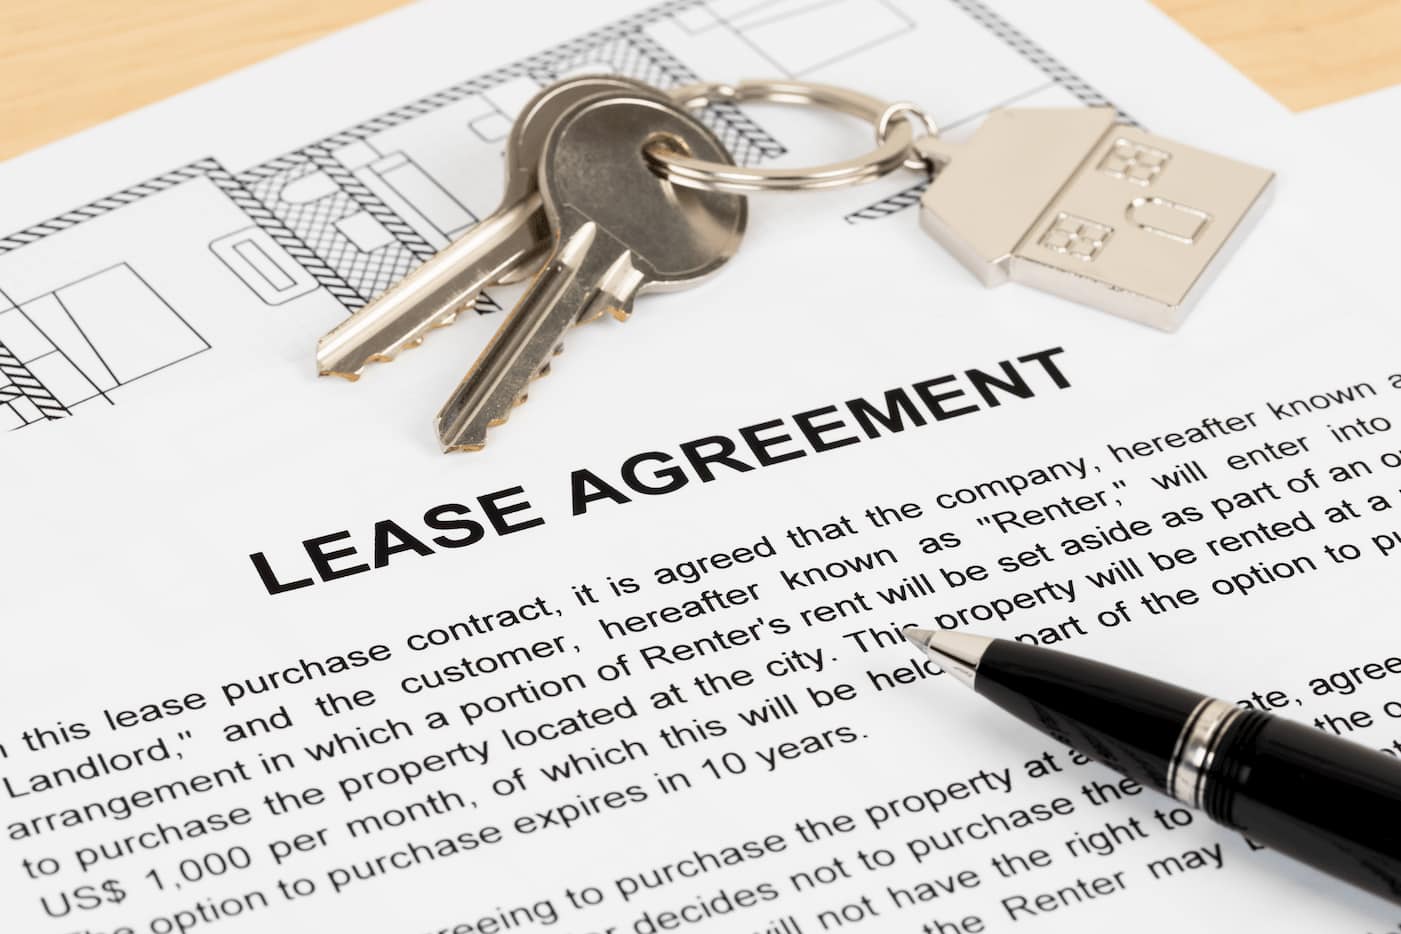 Include animals in rental lease agreements